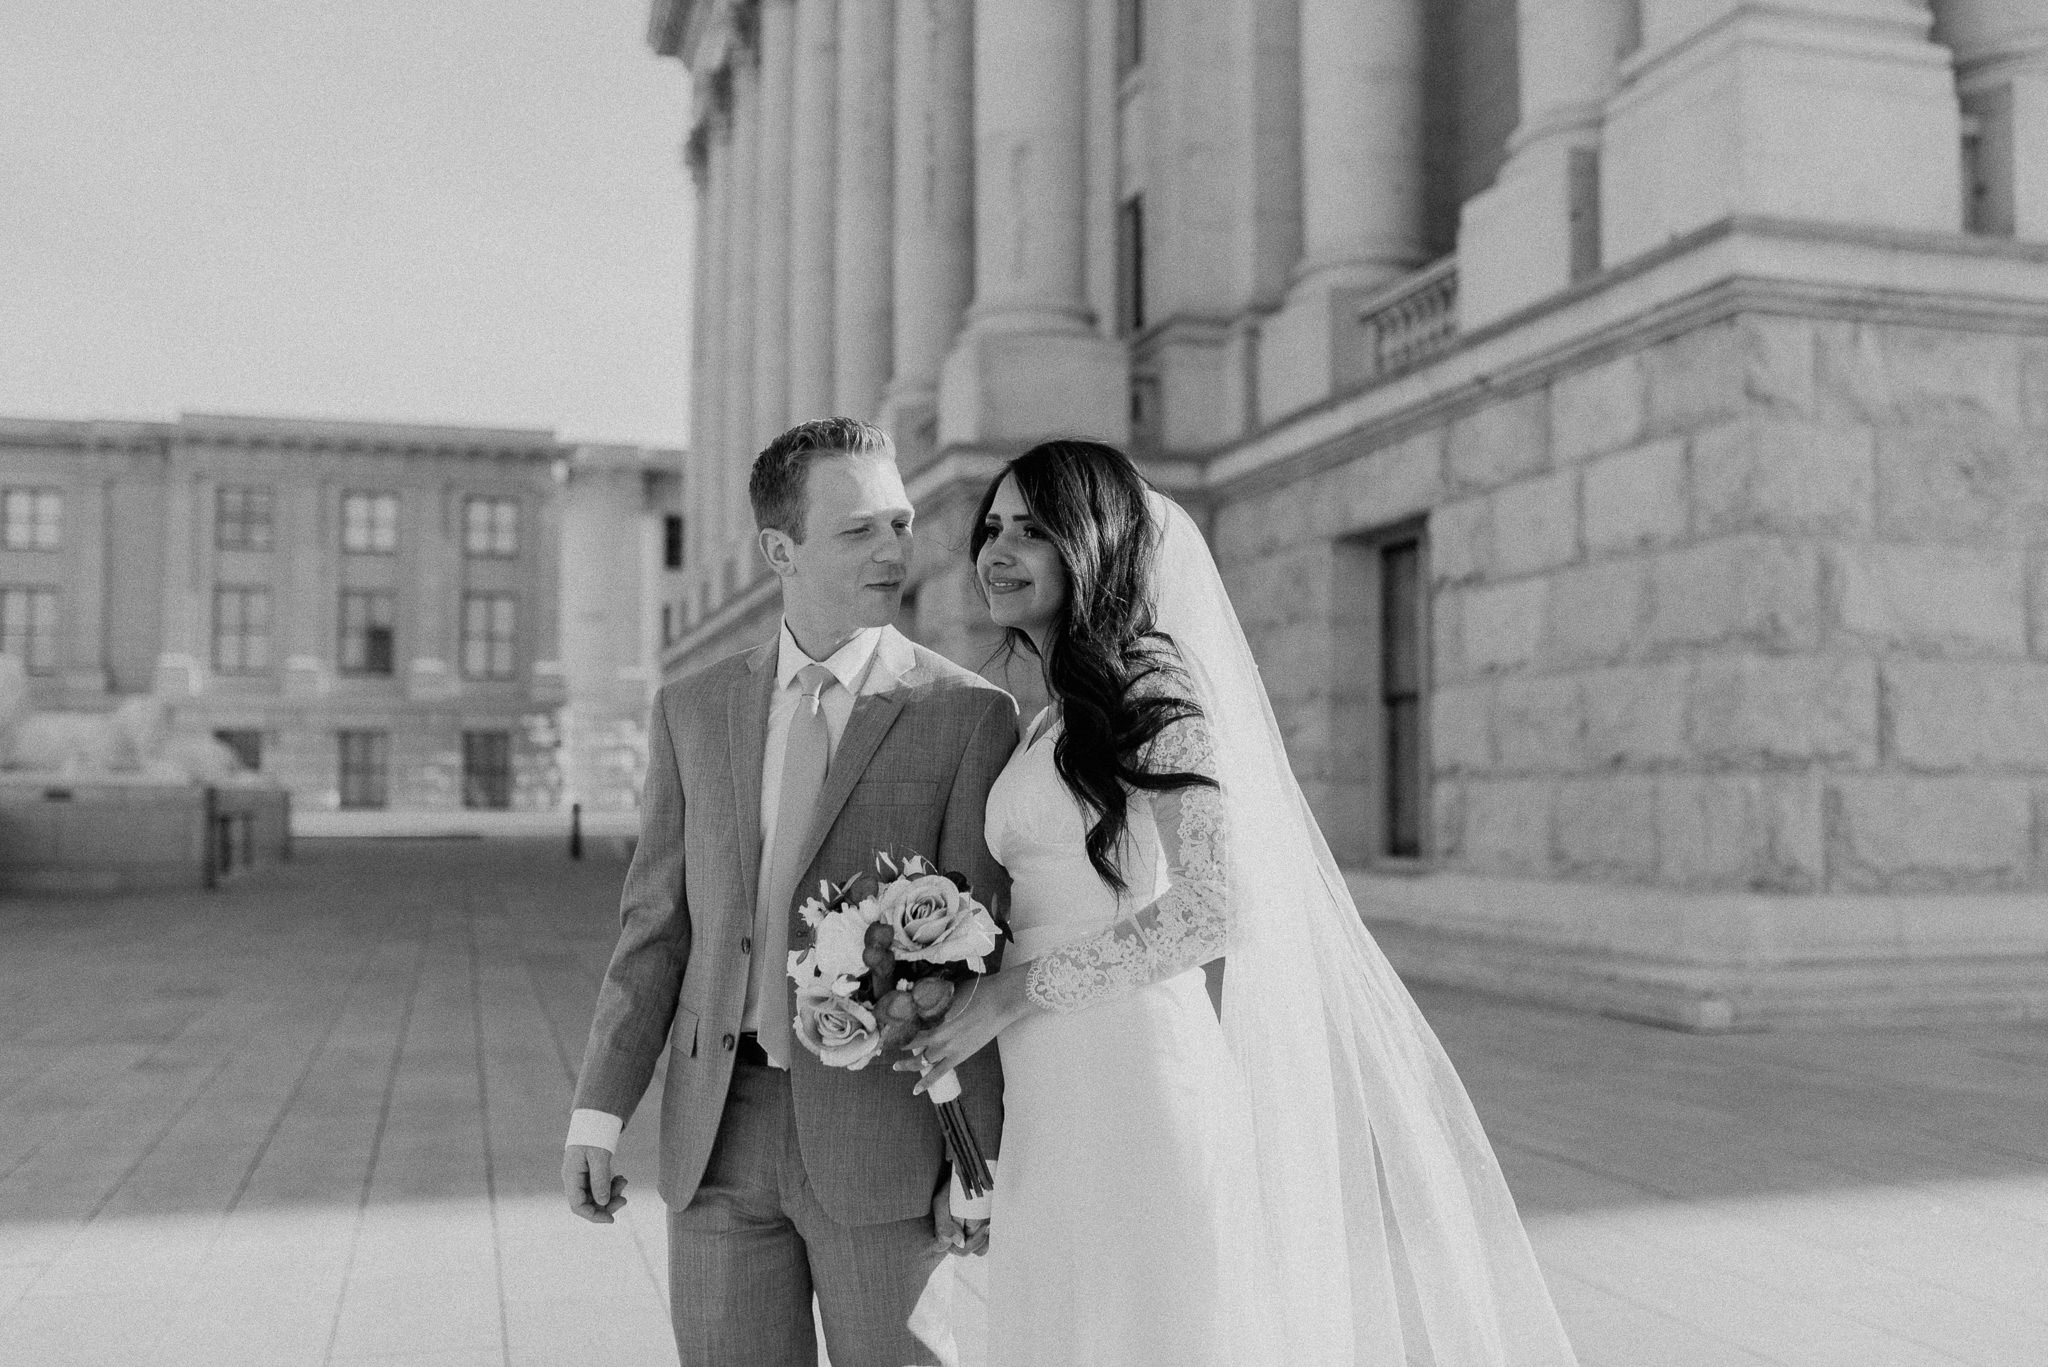 Utah-State-Capitol-Spring-Blossons-Bountiful-LDS-Wedding-Hopesandcheers-photo-14